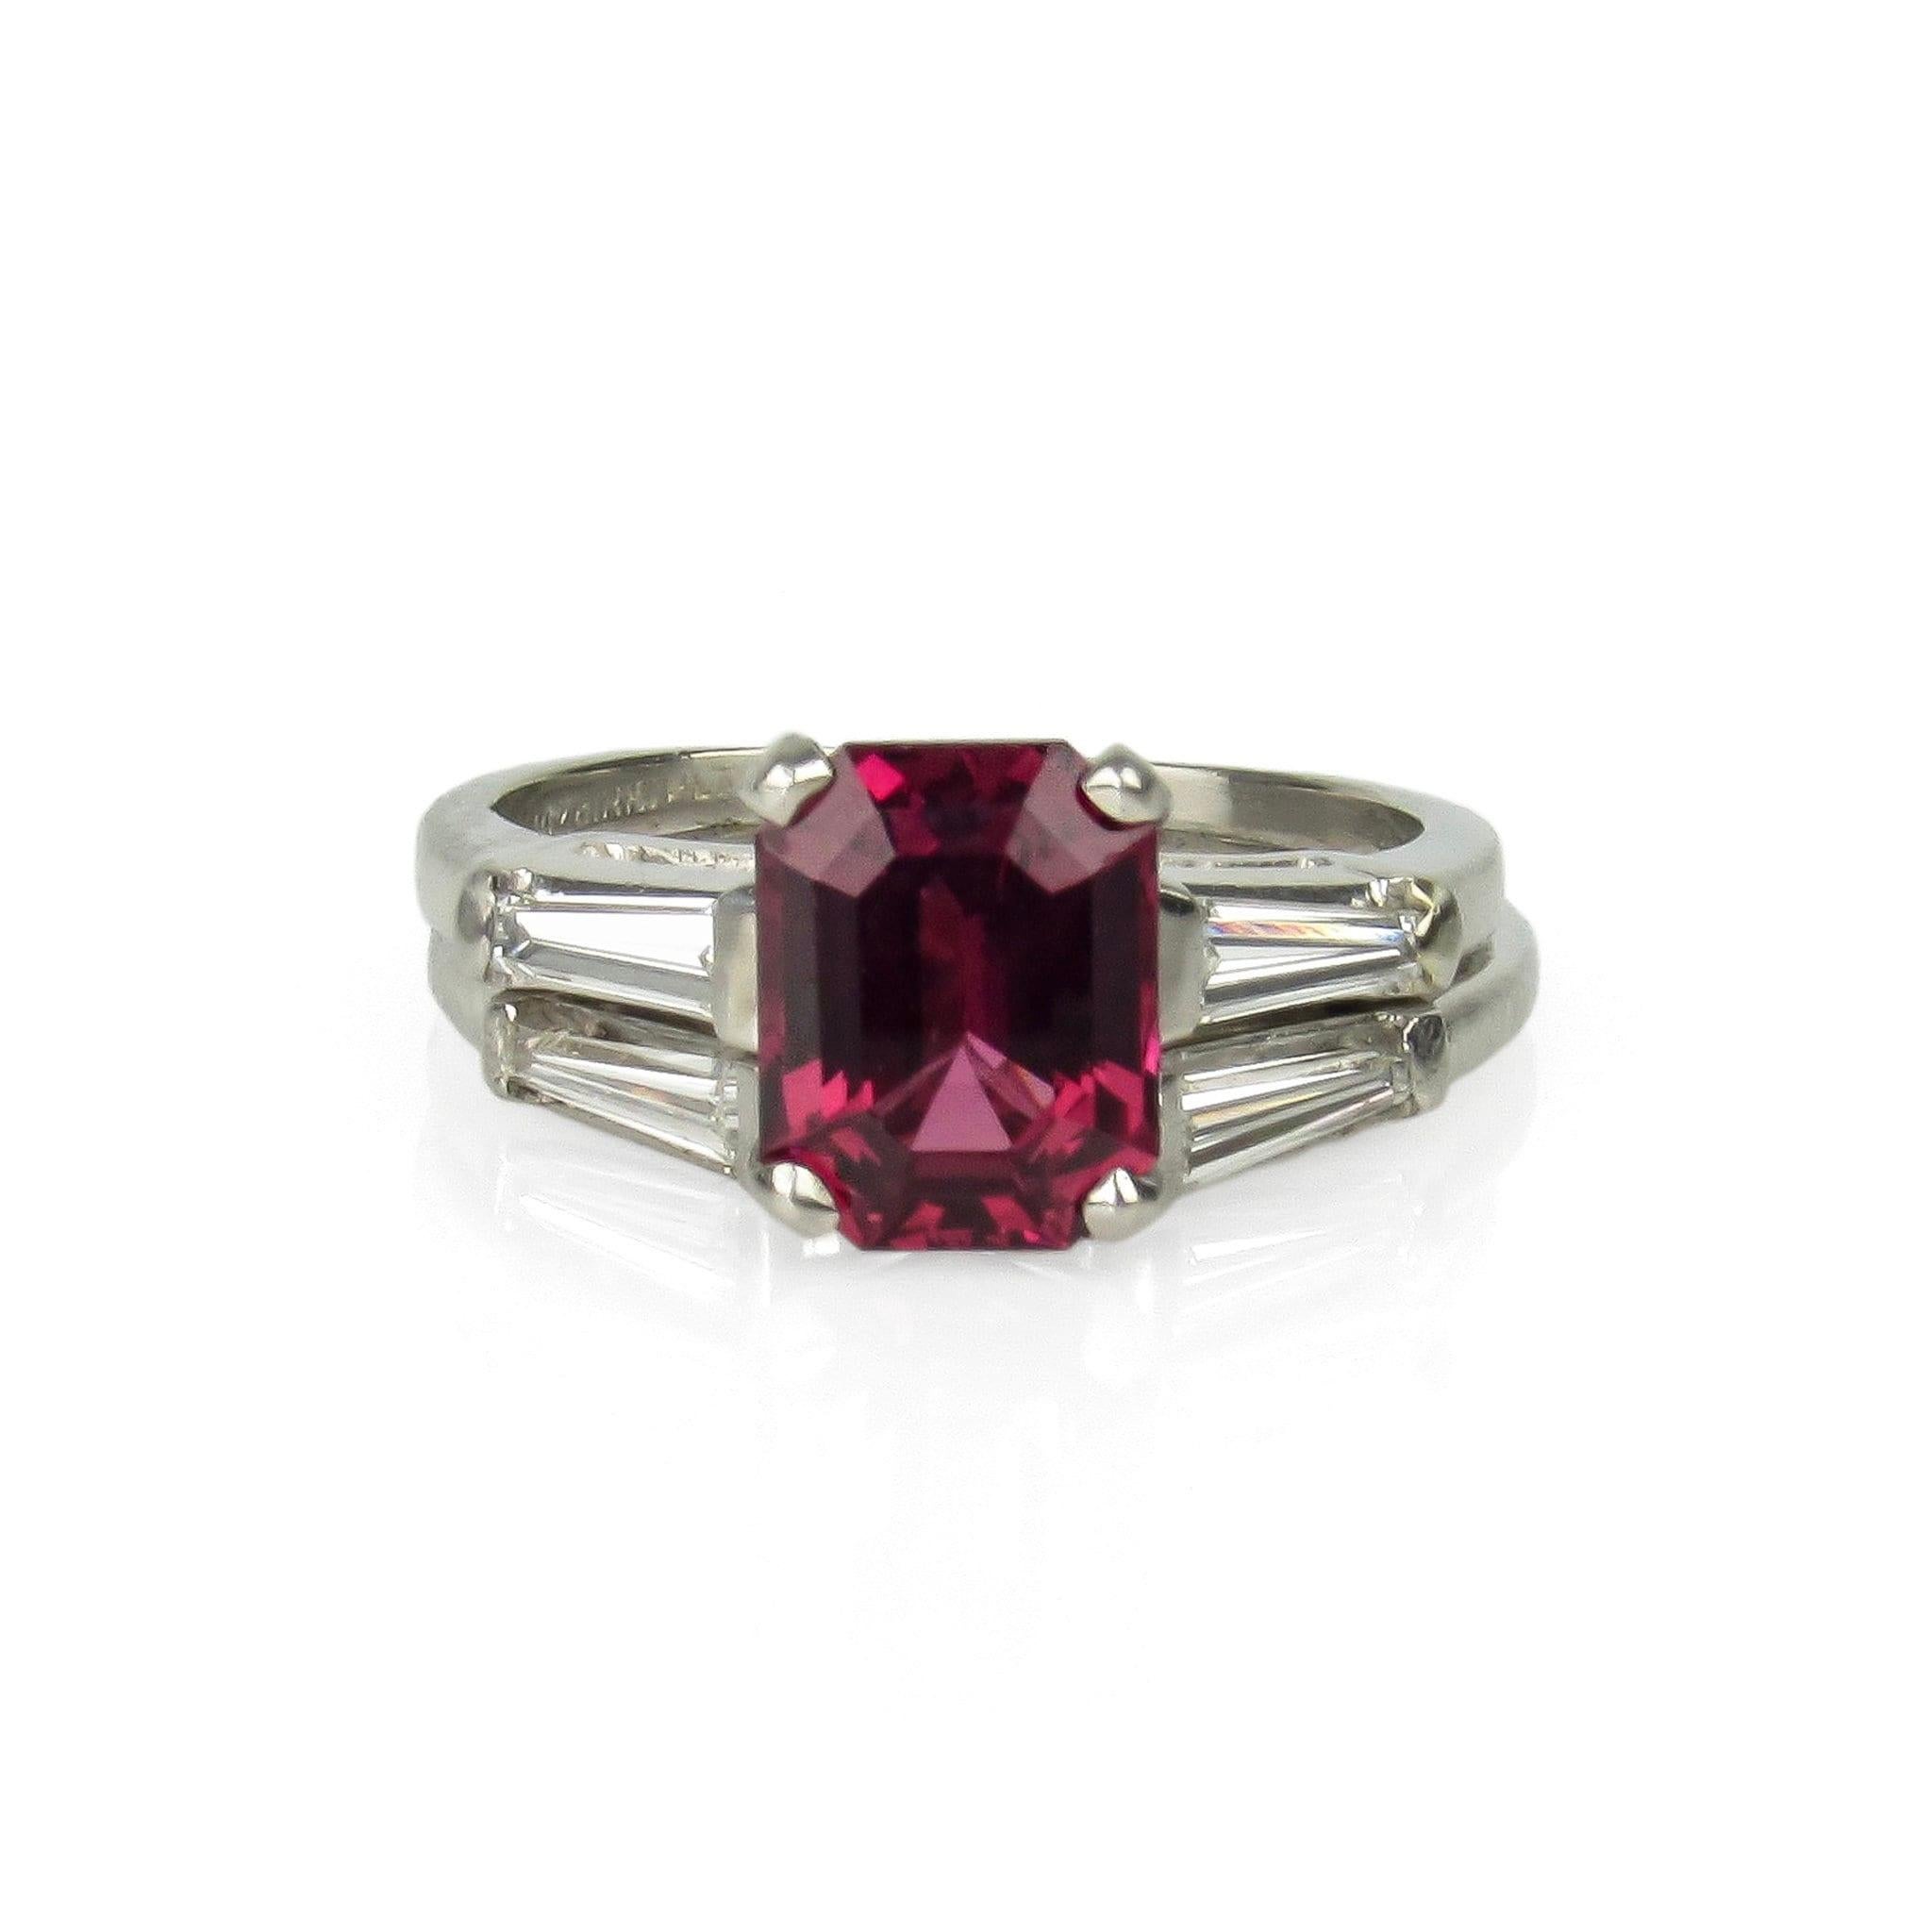 Platinum Brilliant Pink/Red Rubellite Tourmaline & Diamond Ring Set

Size: 5.5

Tourmaline: excellent color and clarity, approximately 2.20 ct. (8.69 x 6.79 x 4.81 mm)

Diamonds: four tapered baguettes, .12 ct each, VS1 - VS2 range in clarity, H-I